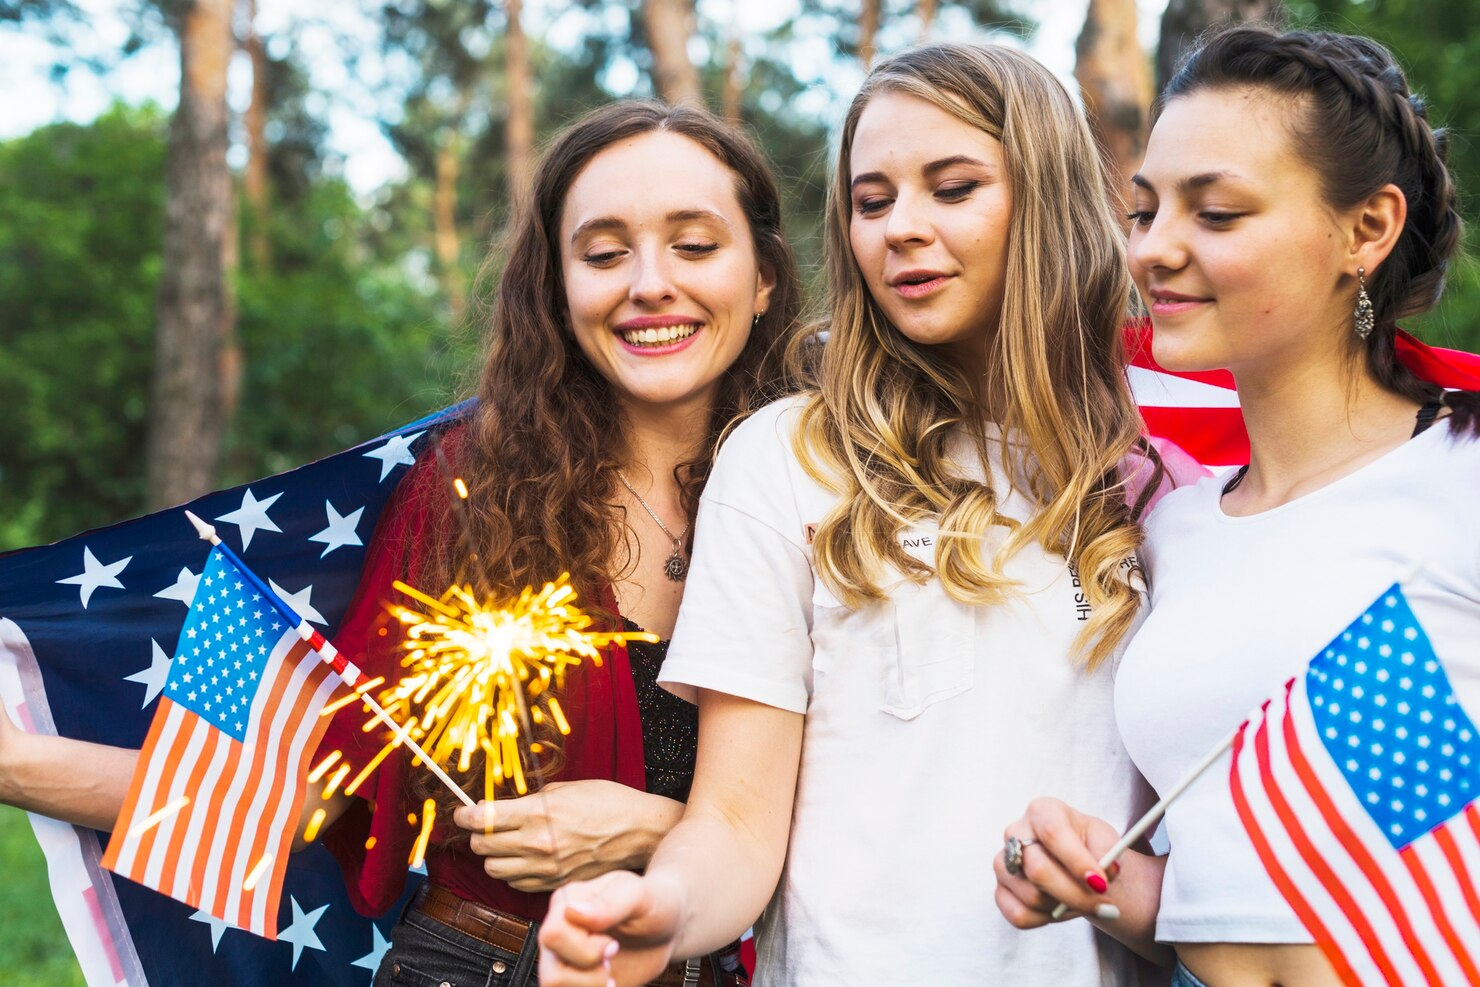 Girls celebrating 4th of July with flags and sparklers.